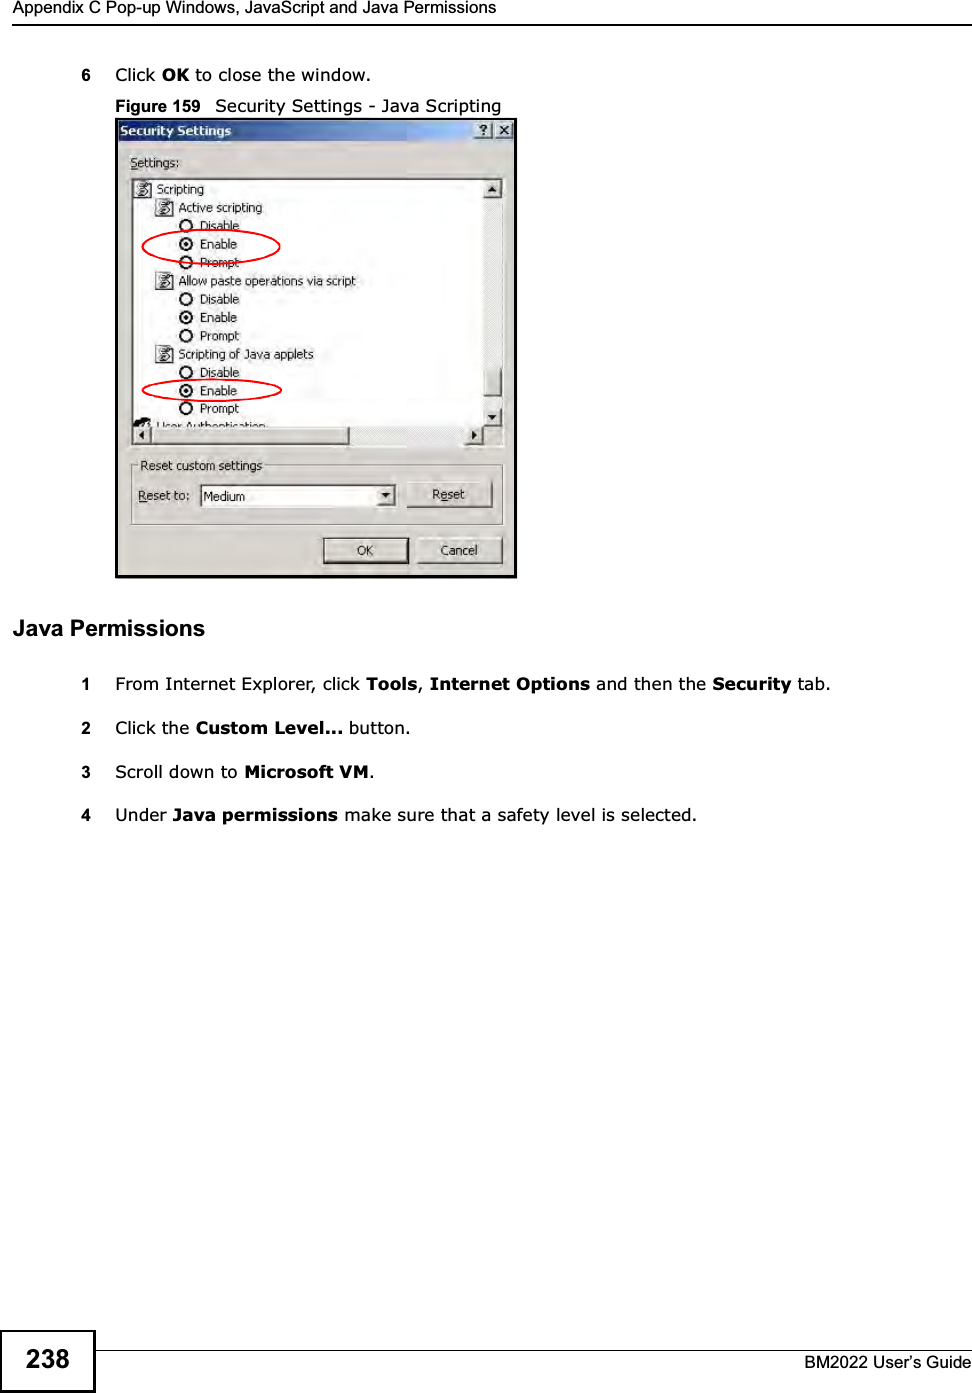 Appendix C Pop-up Windows, JavaScript and Java PermissionsBM2022 Users Guide2386Click OK to close the window.Figure 159   Security Settings - Java ScriptingJava Permissions1From Internet Explorer, click Tools, Internet Options and then the Security tab. 2Click the Custom Level... button. 3Scroll down to Microsoft VM. 4Under Java permissions make sure that a safety level is selected.